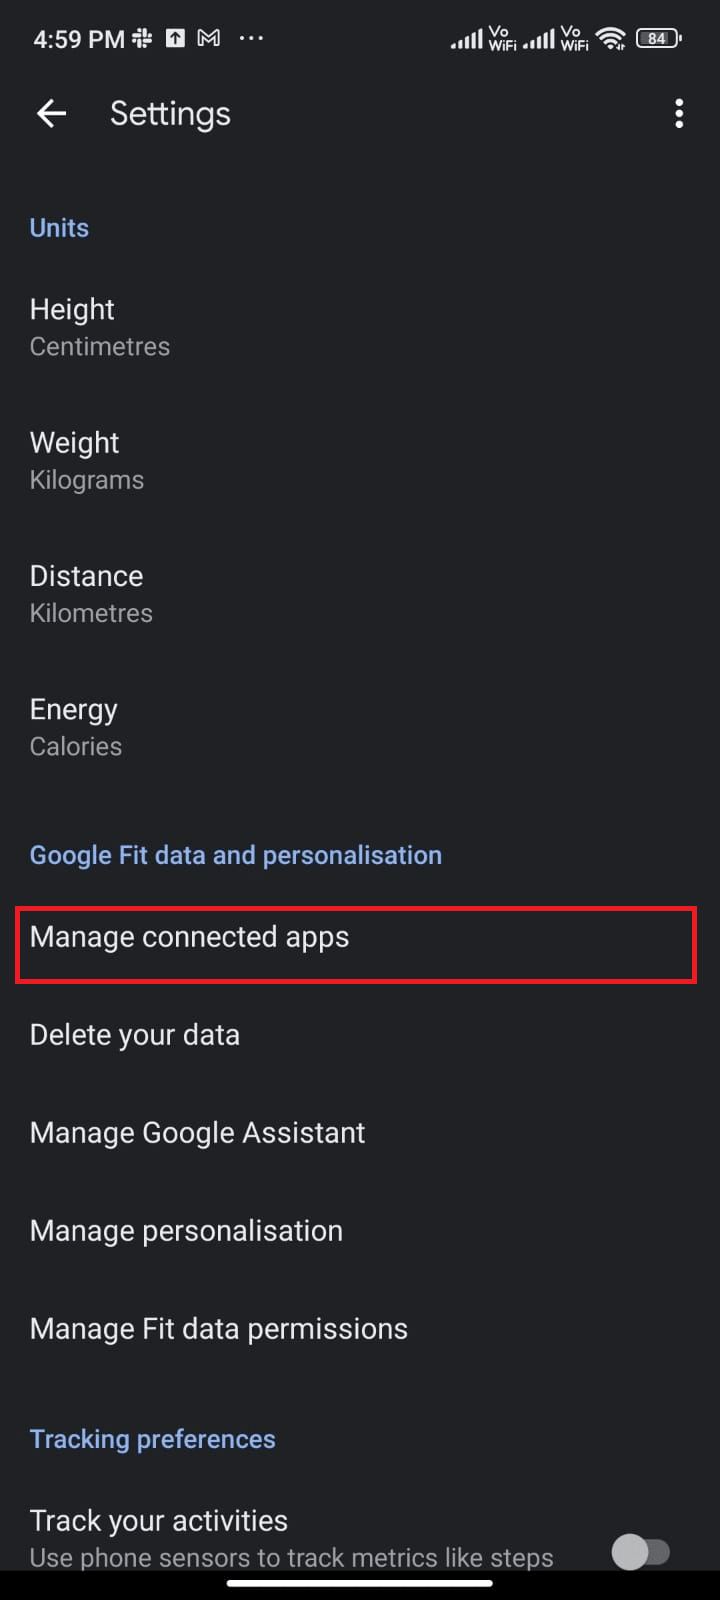 Then, tap Manage connected apps